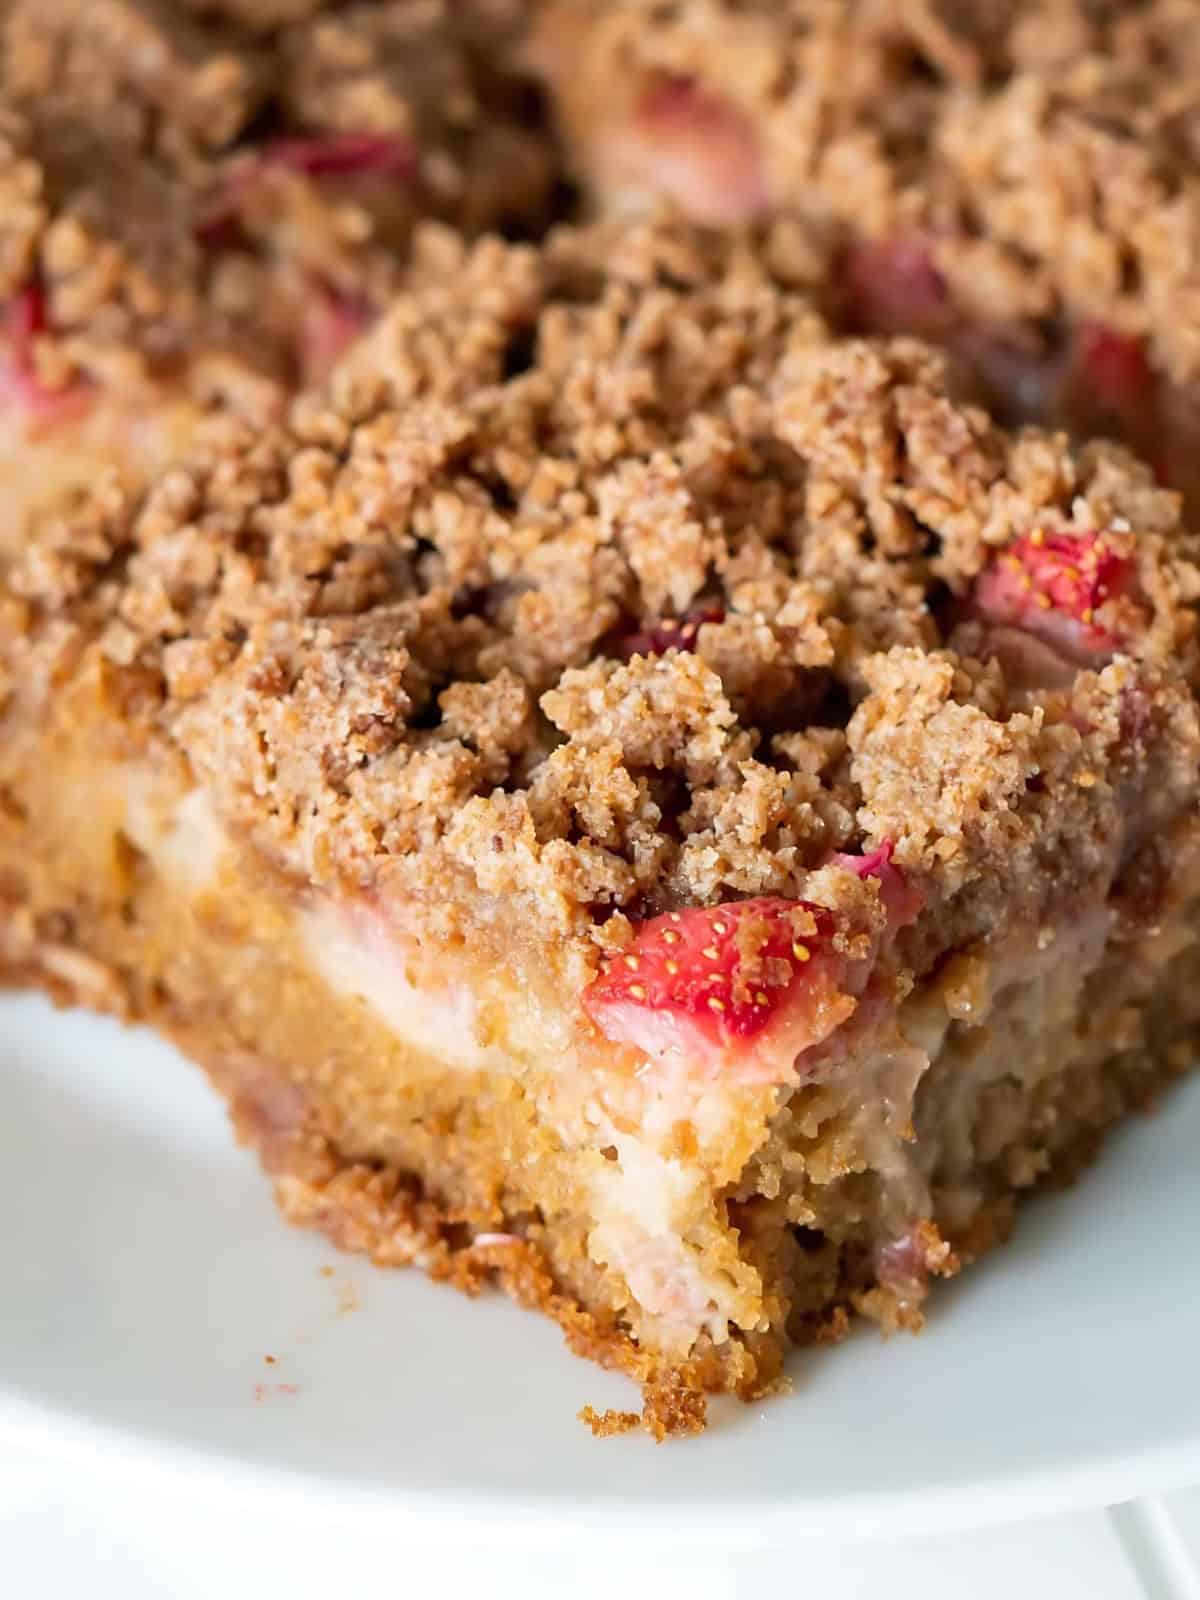 A serving of rhubarb coffee cakes.